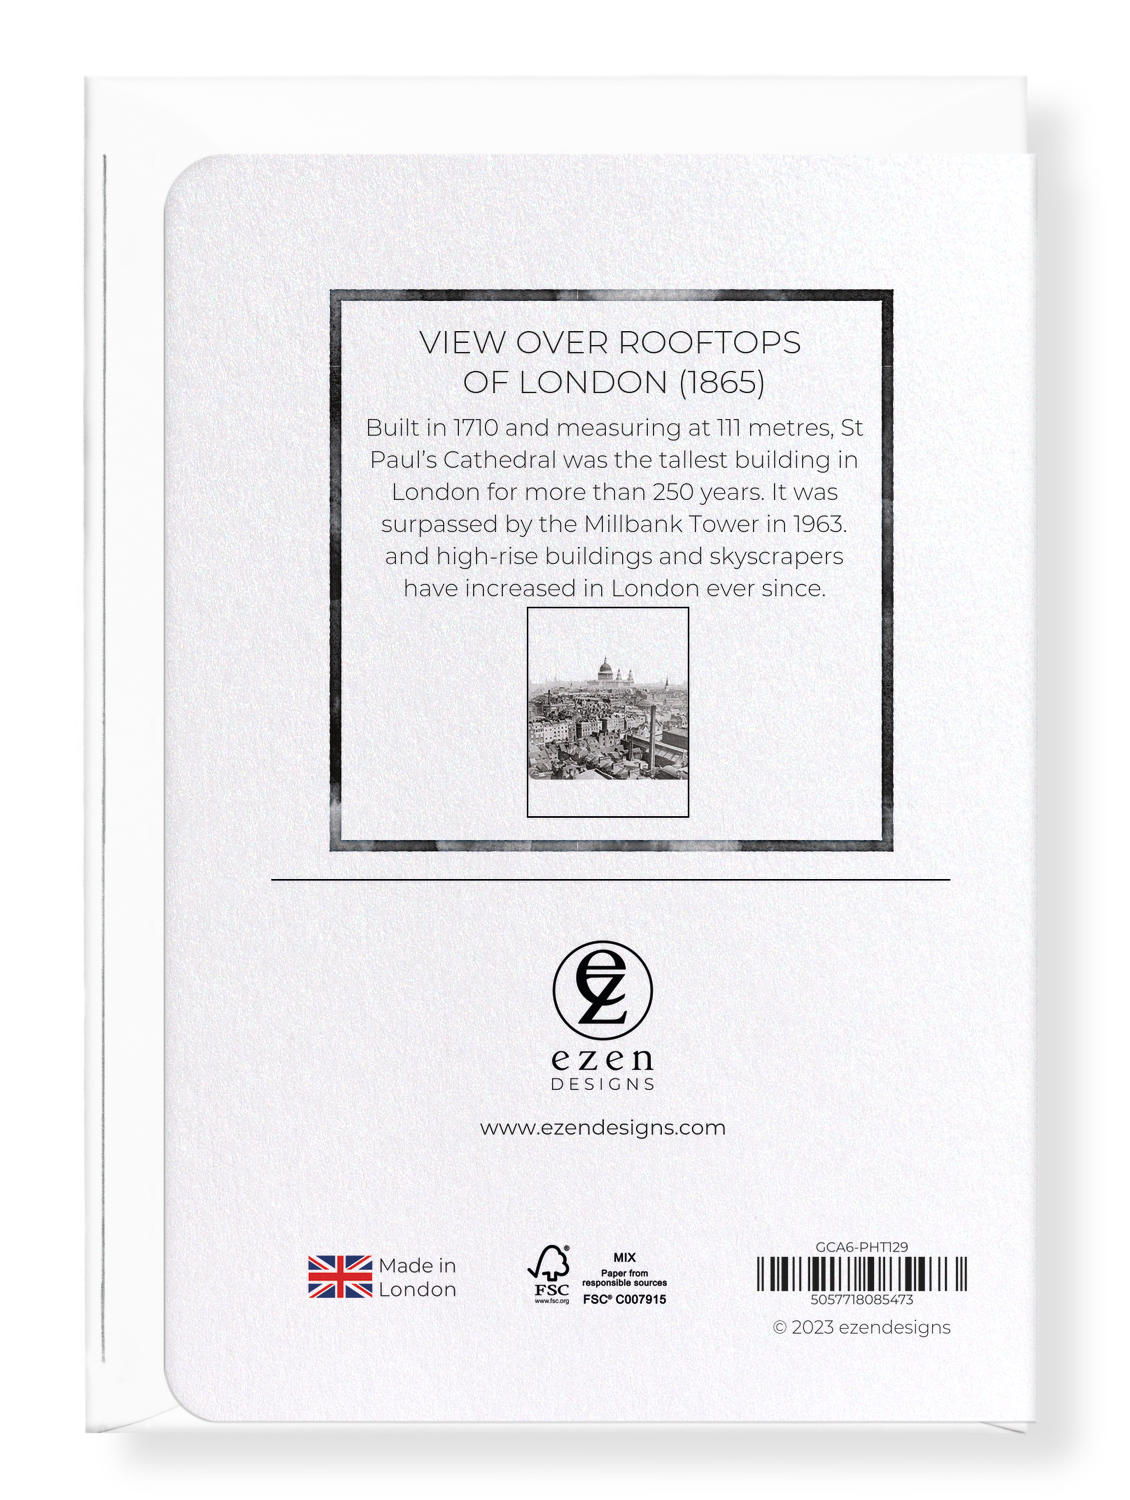 Ezen Designs - View Over Rooftops of London (1865) - Greeting Card - Back